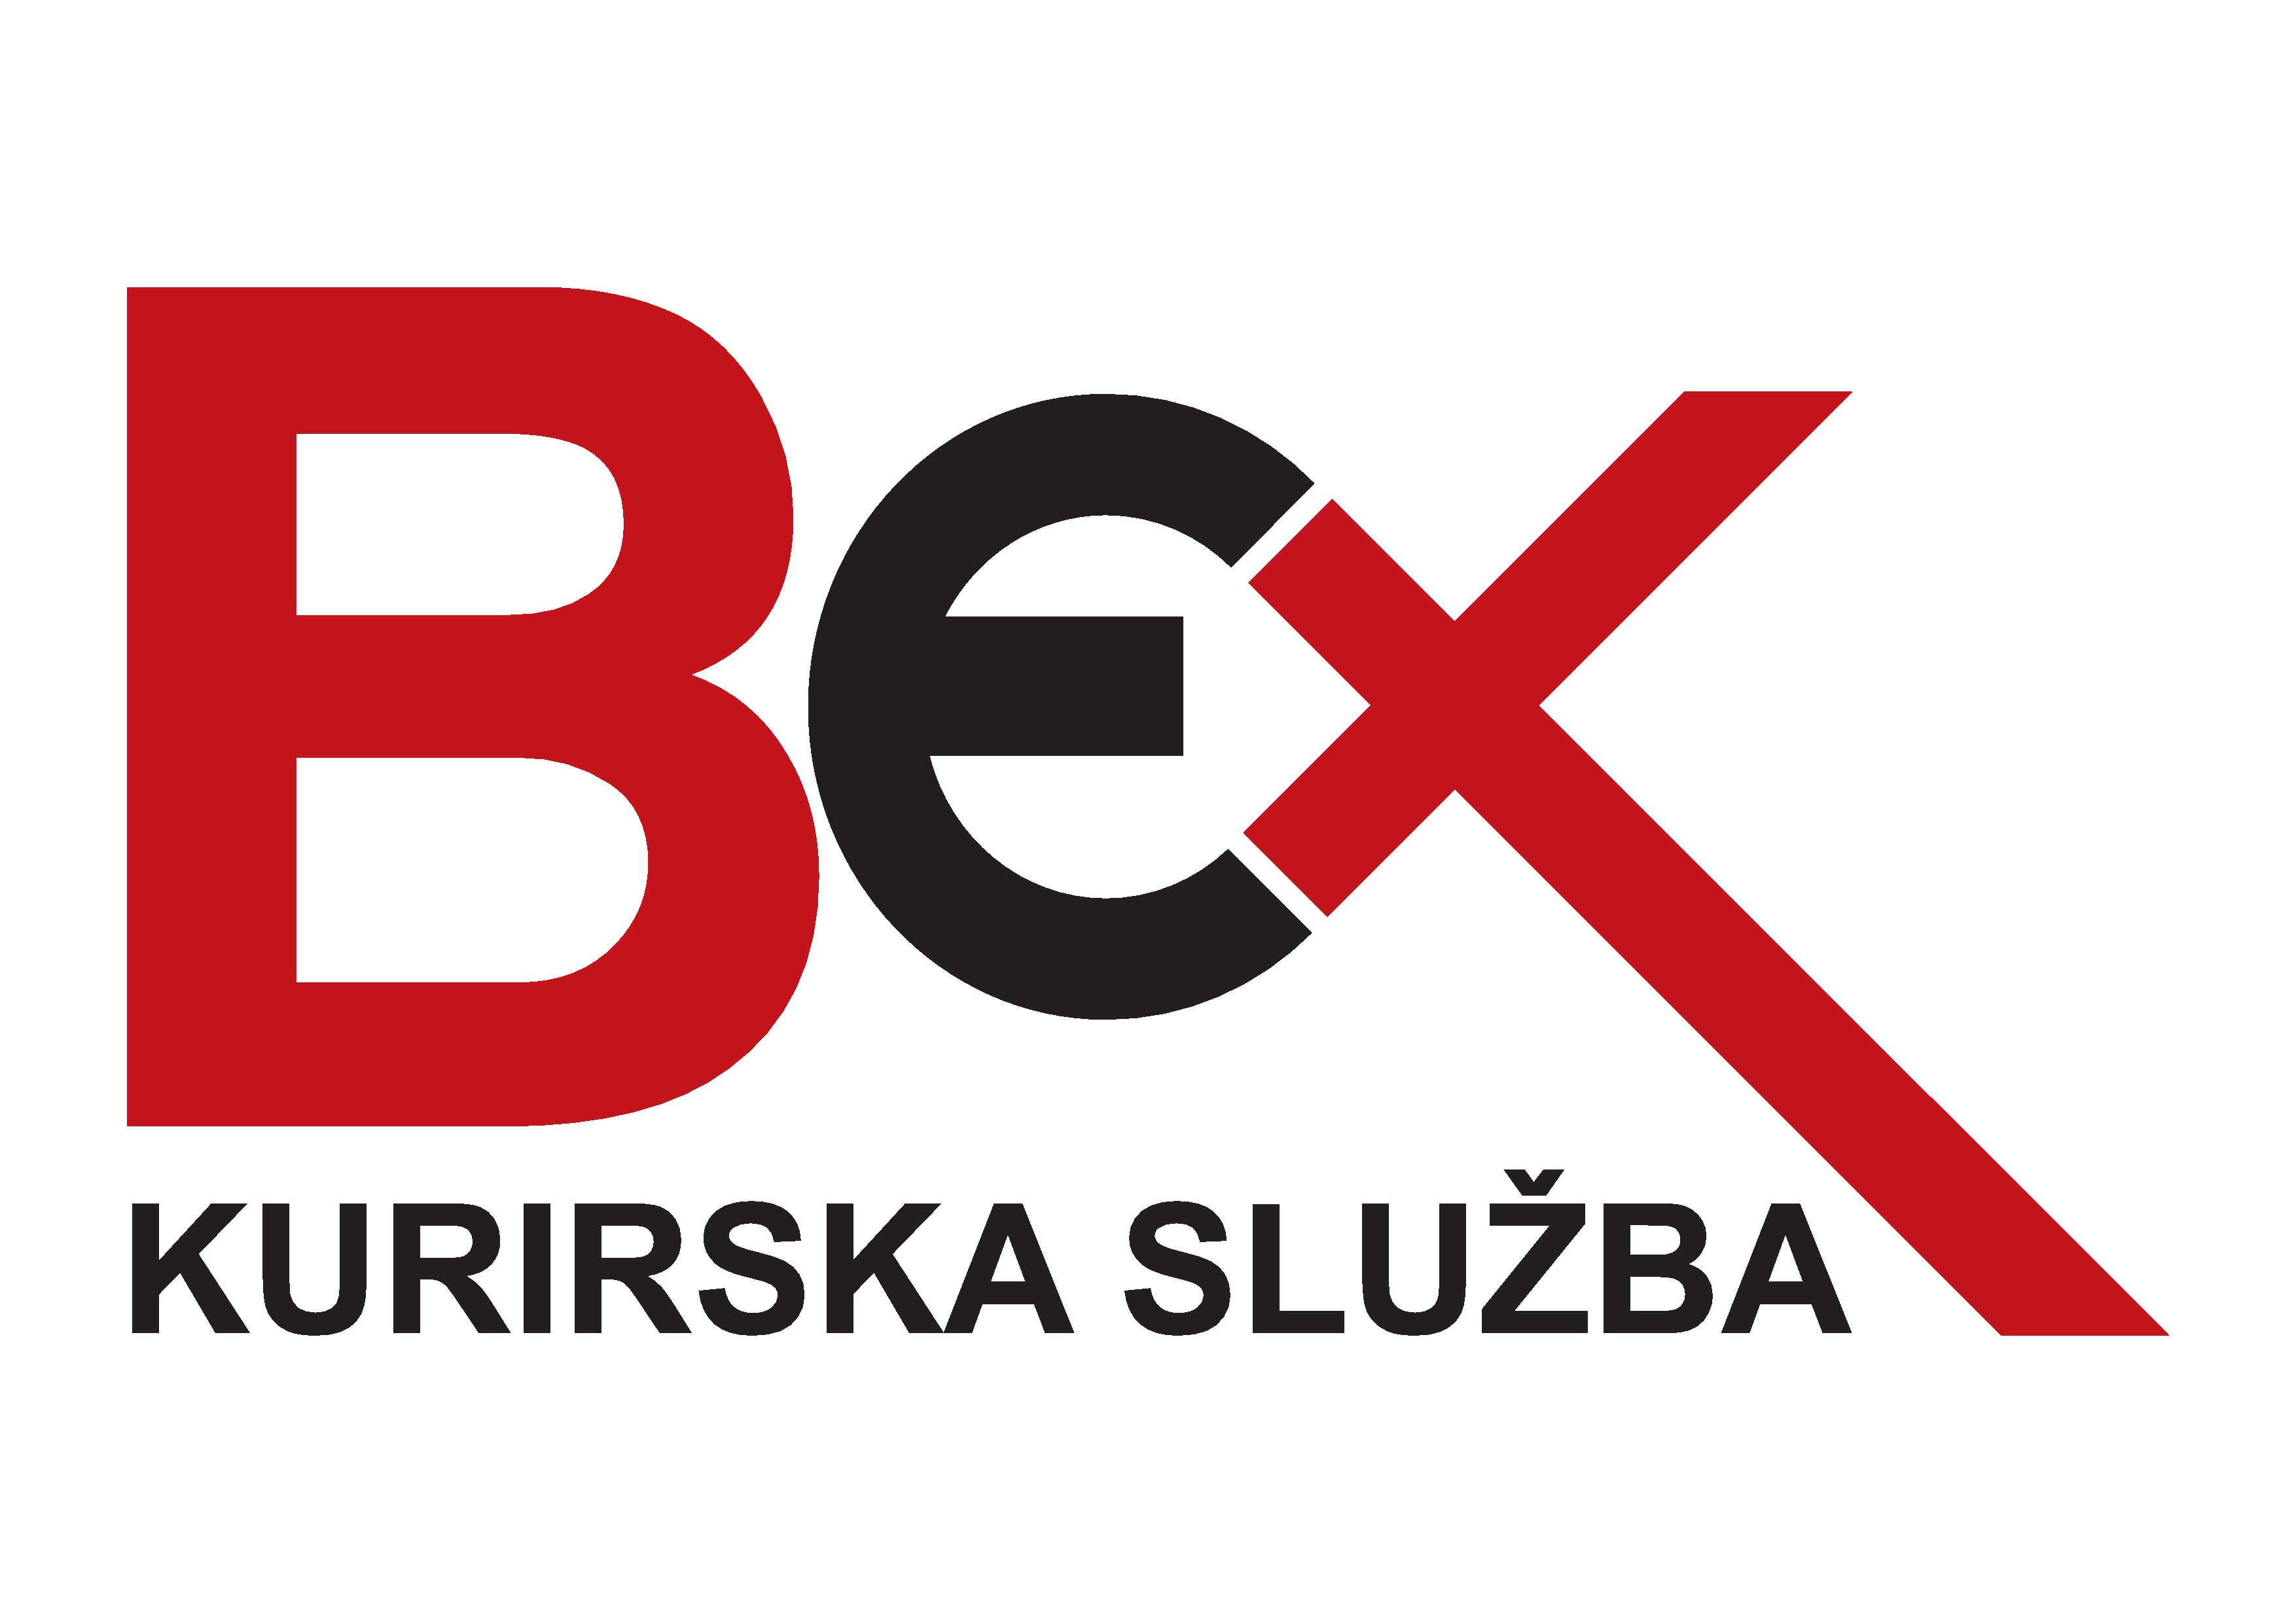 Bex_logo-page-001